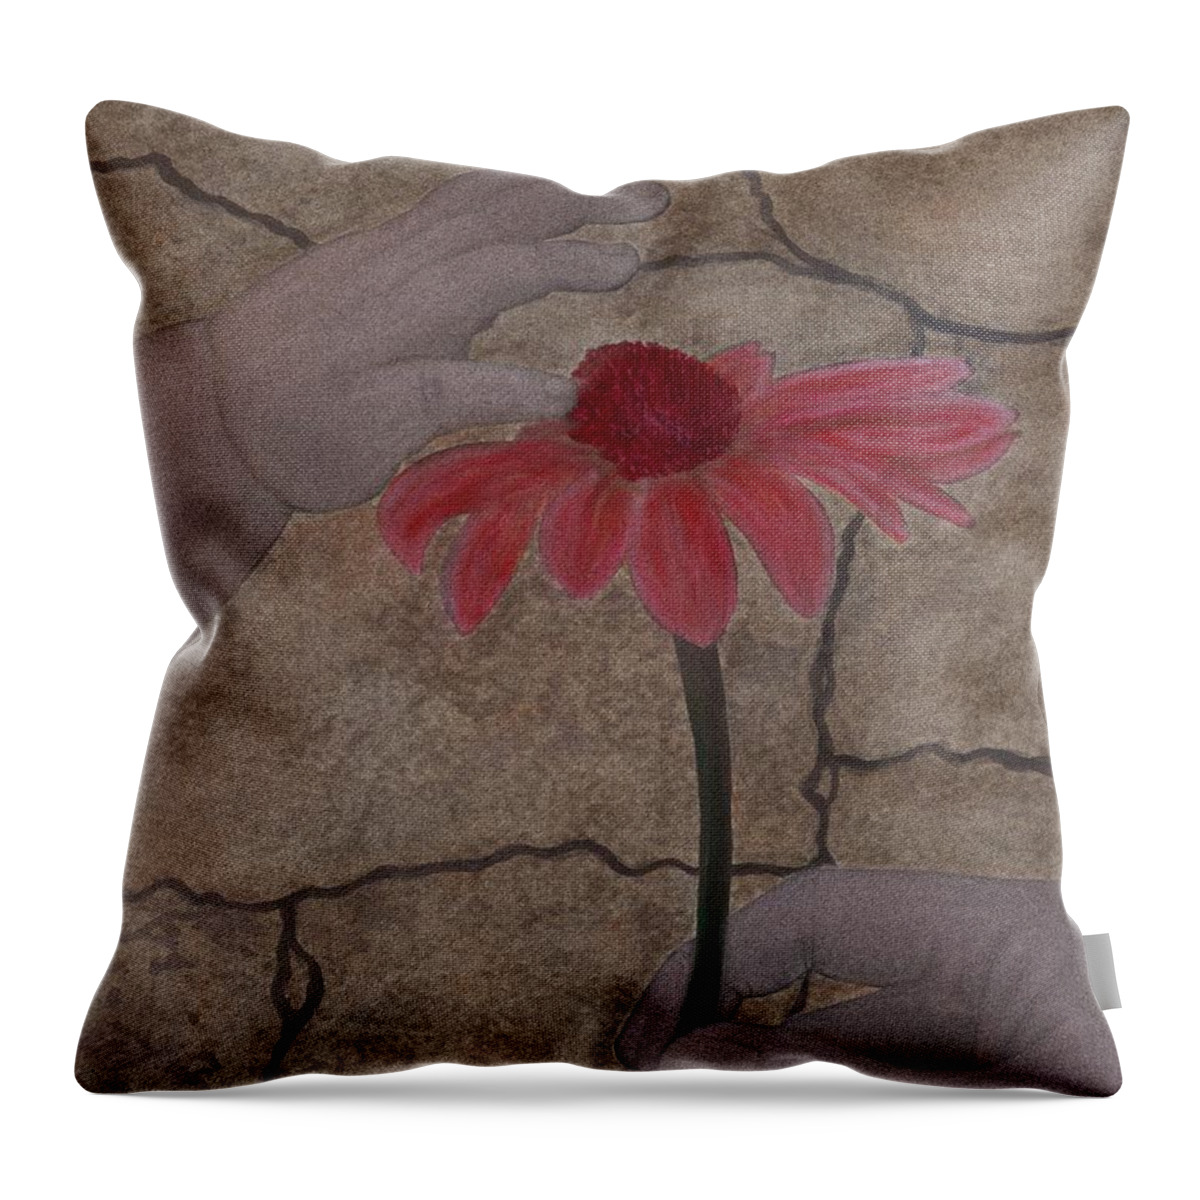 The Creation Of Eve Throw Pillow featuring the painting The Creation of Eve by Barbara St Jean